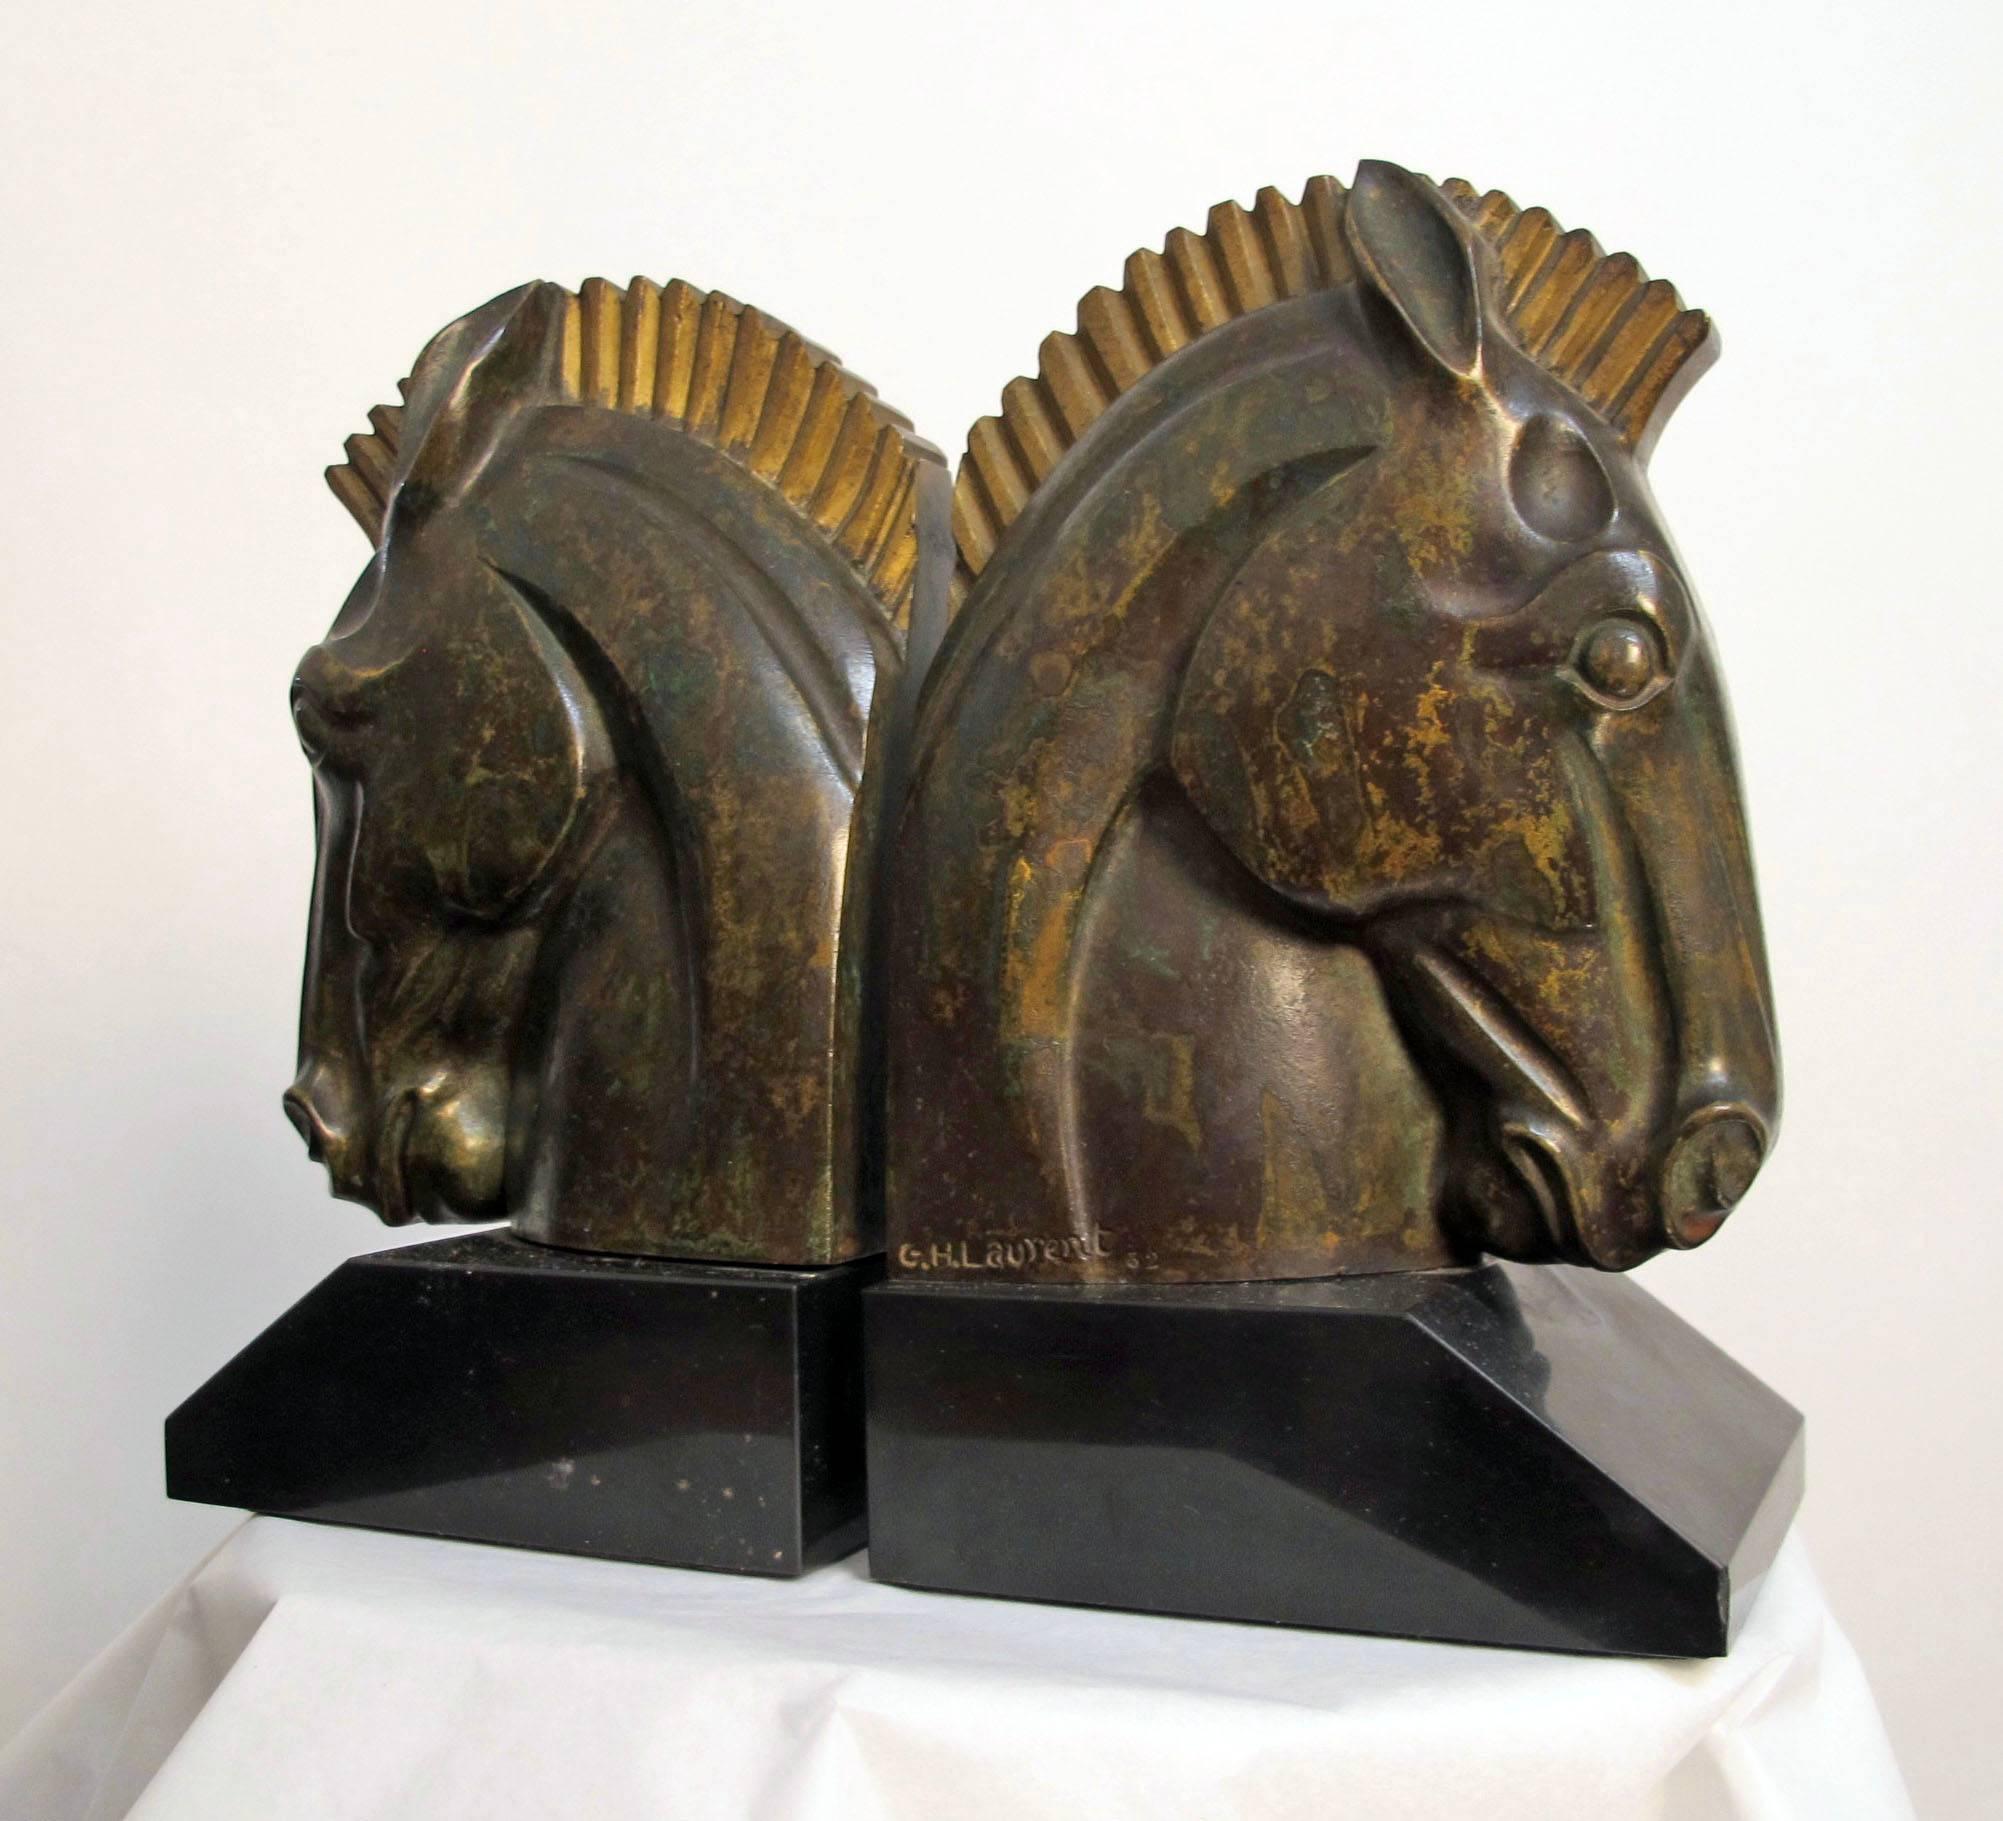 Art Deco bronze horse head bookends on polished slate bases. Signed G. H. Laurent and numbered, France, 1920s-1930s.